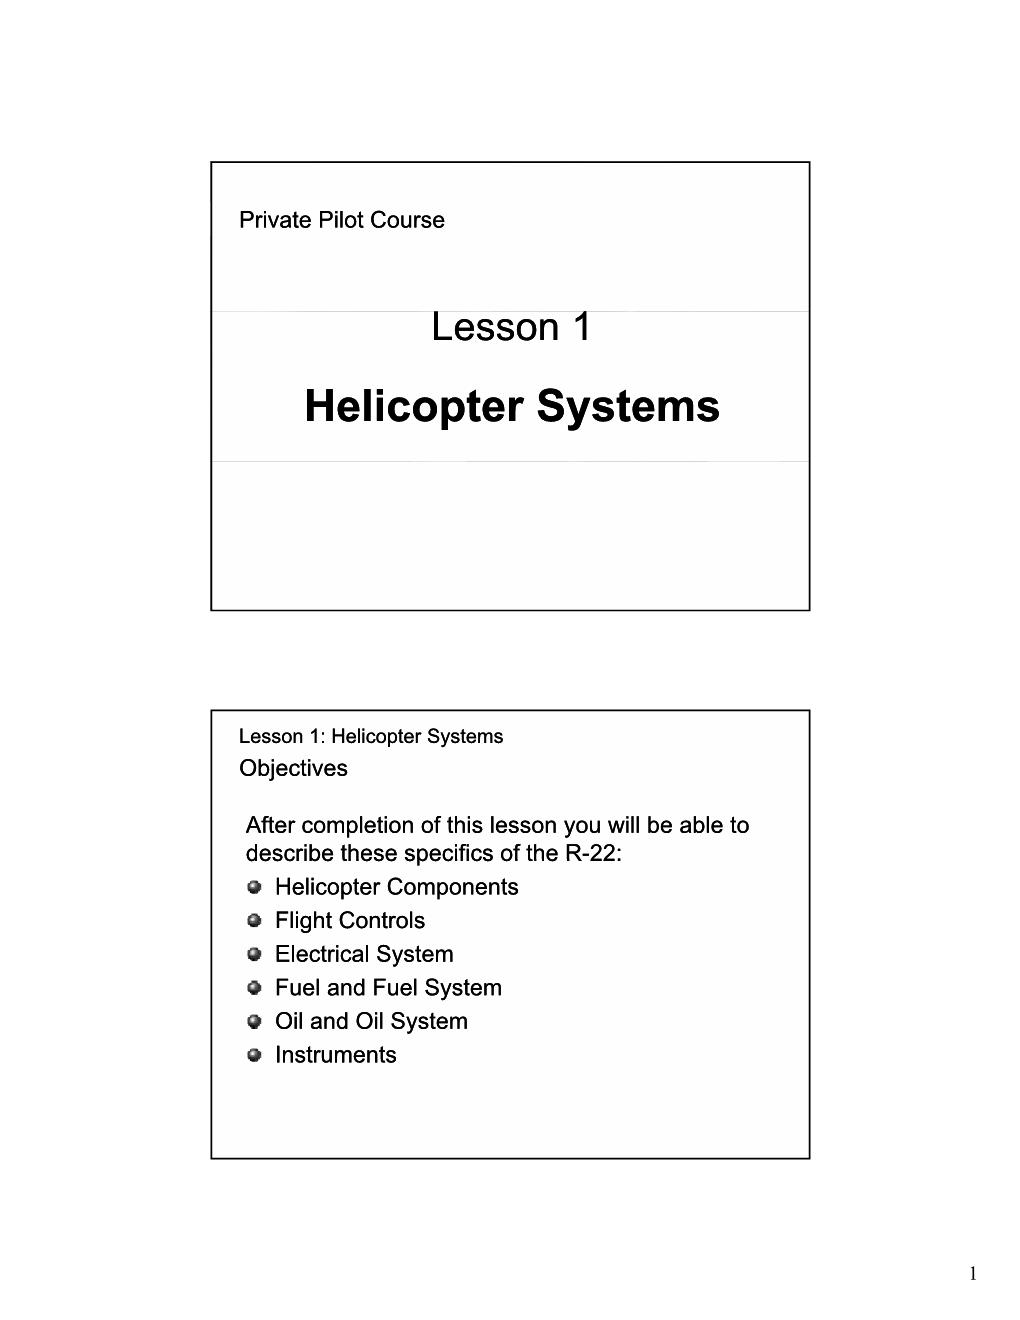 Helicopter Systems